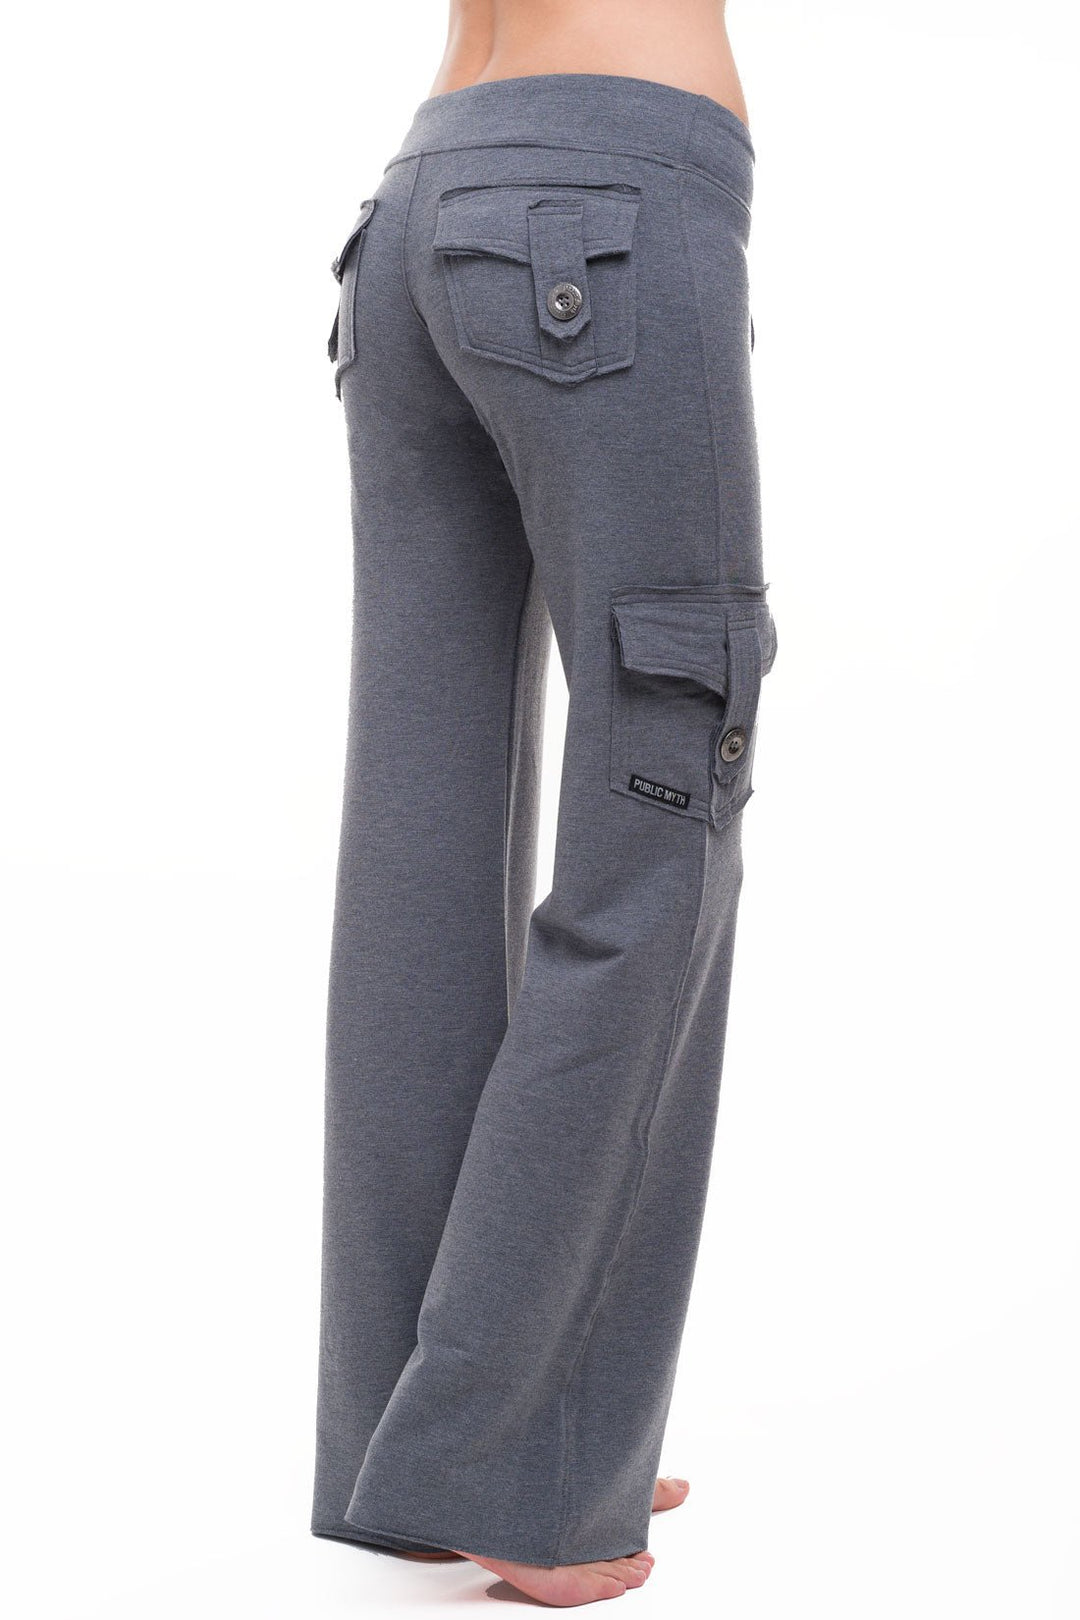 Grey wide leg bamboo cargo yoga pants with back pockets and a side pocket